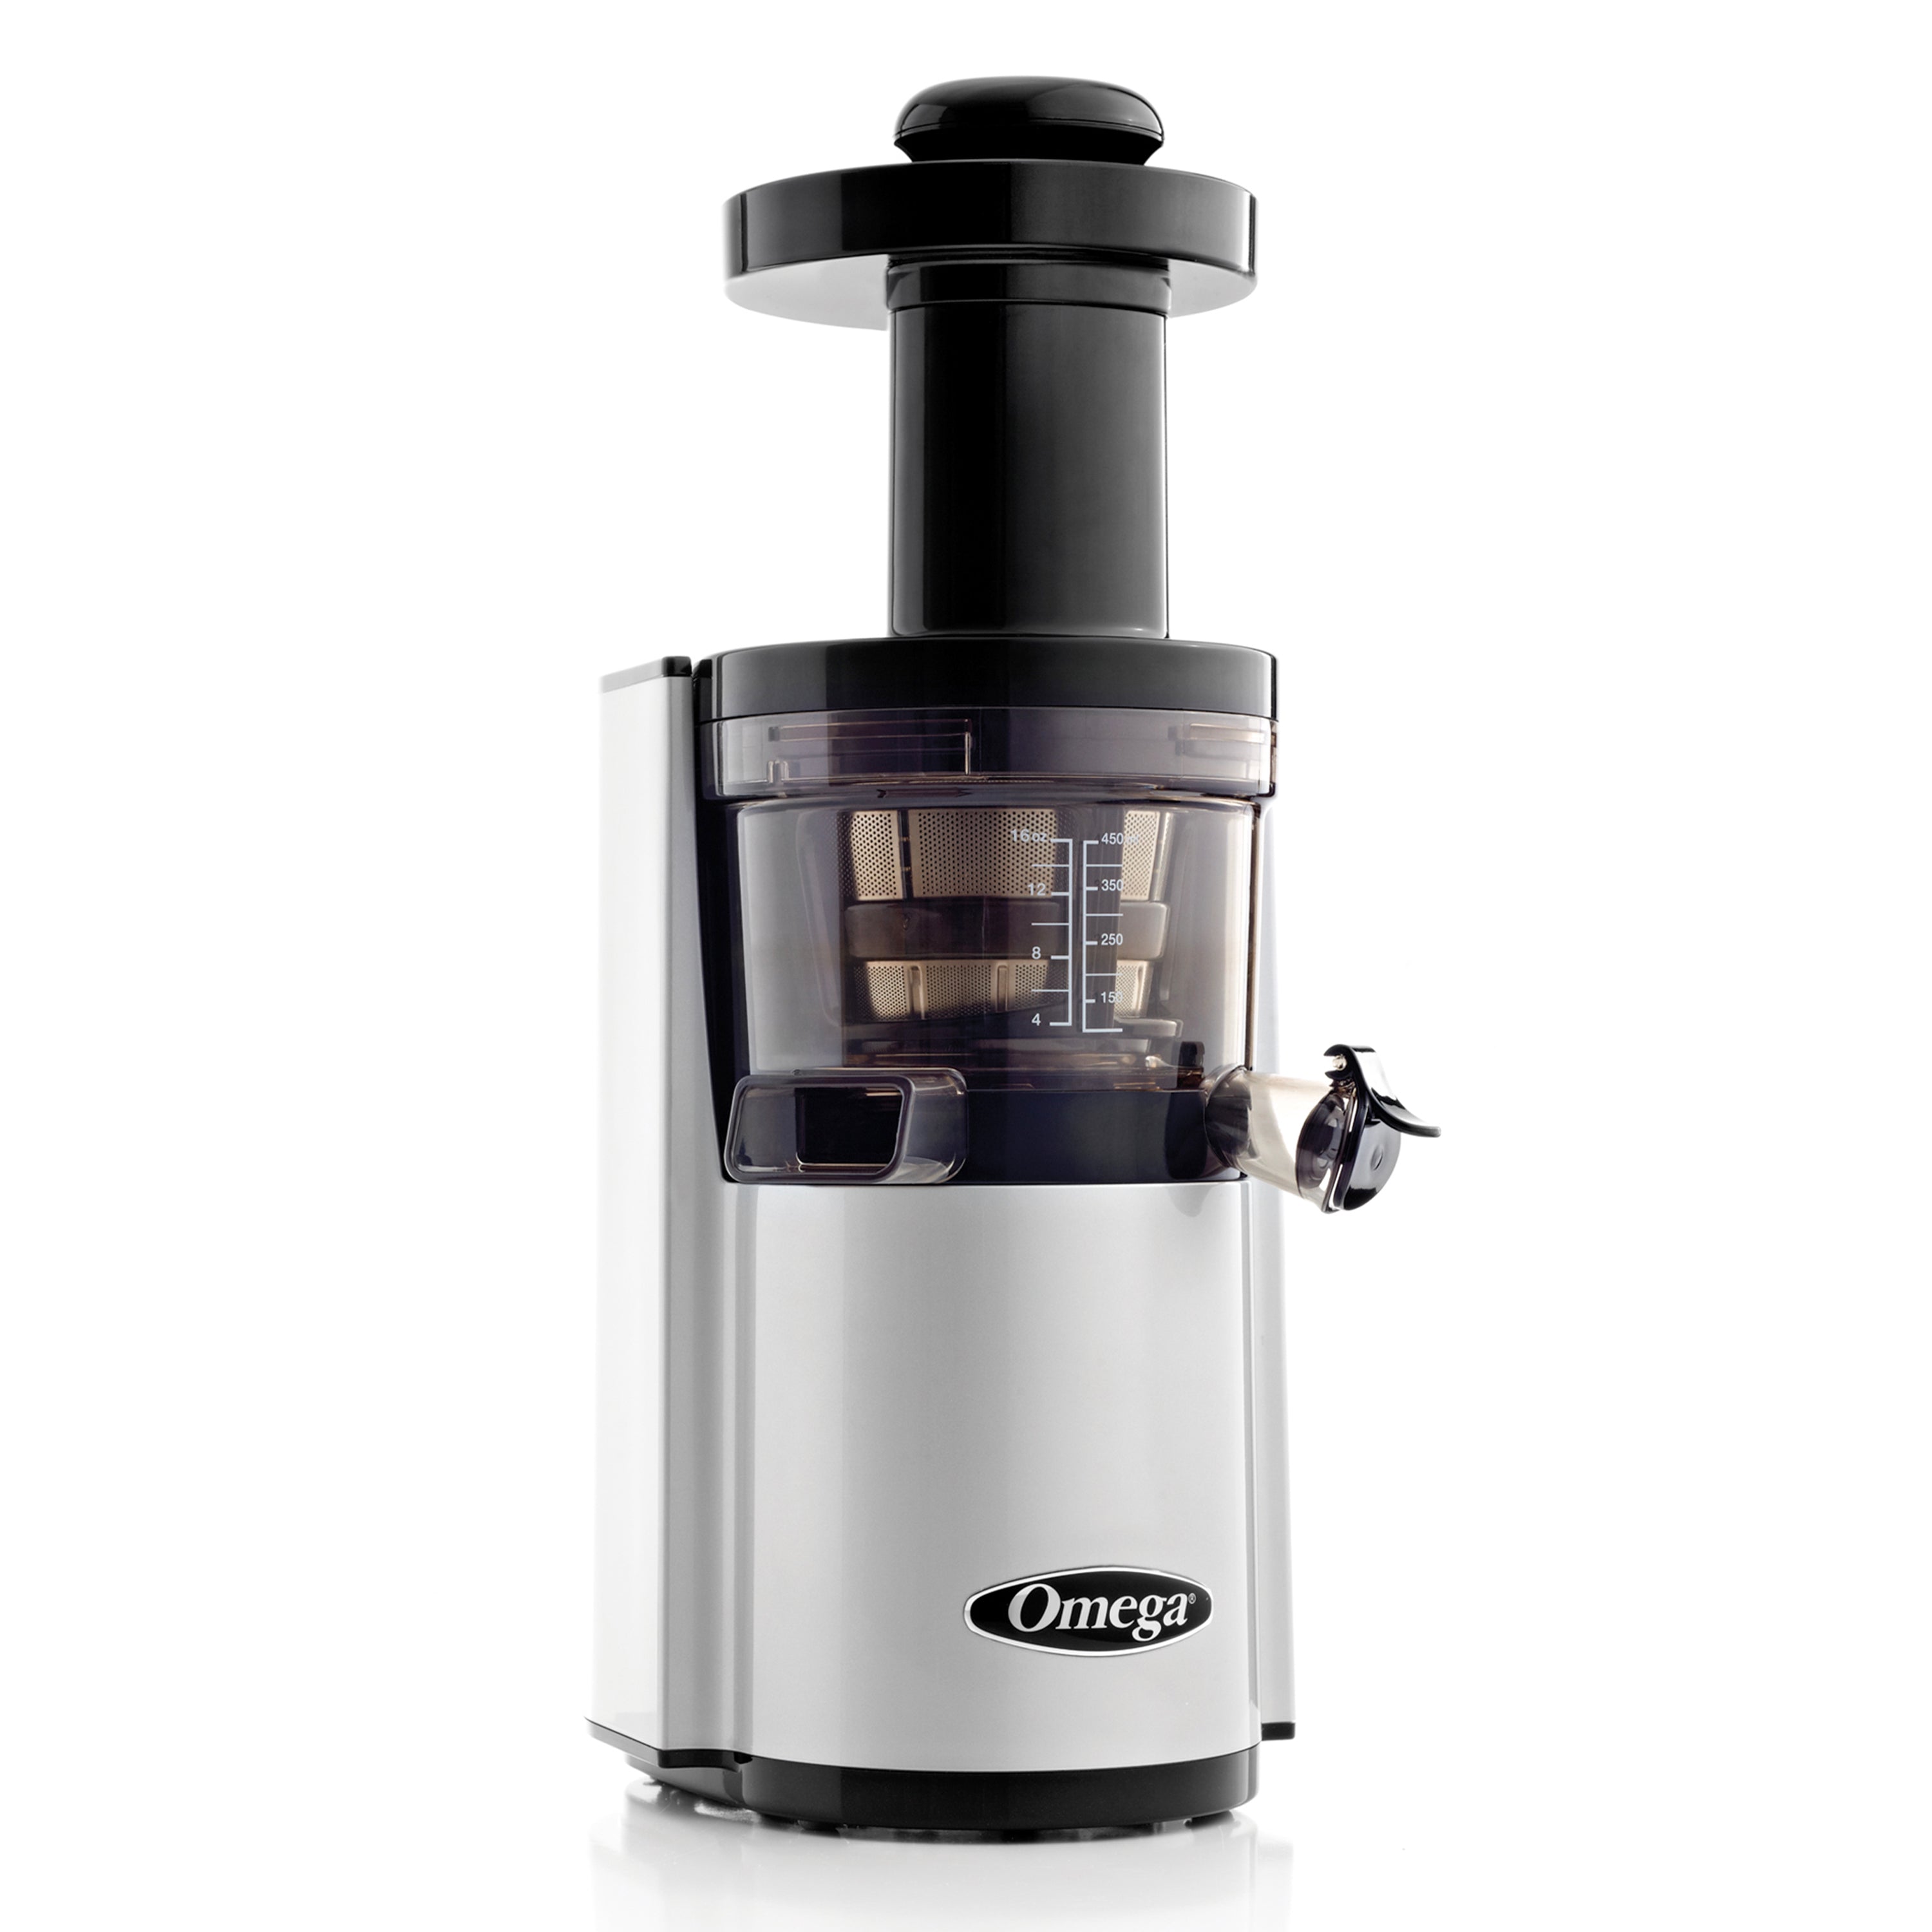 Omega - VSJ843RS, Omega Vertical Slow Masticating Juicer, Compact Design with Automatic Pulp Ejection, 43 RPM, 150-Watt, in Silver